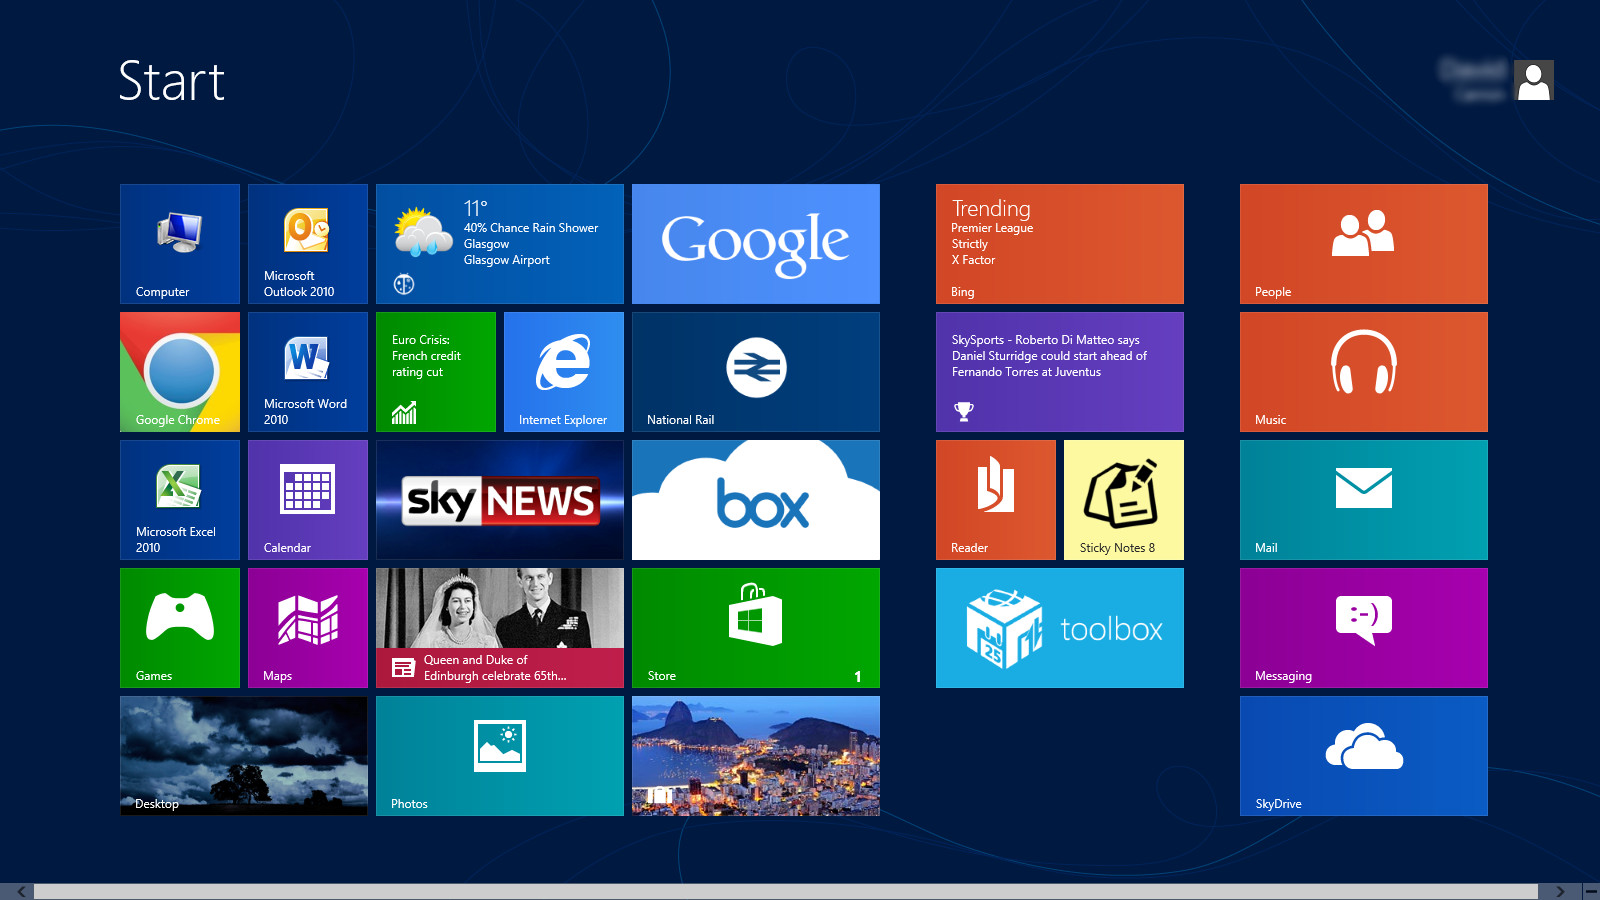 Ask the Experts: Windows 8